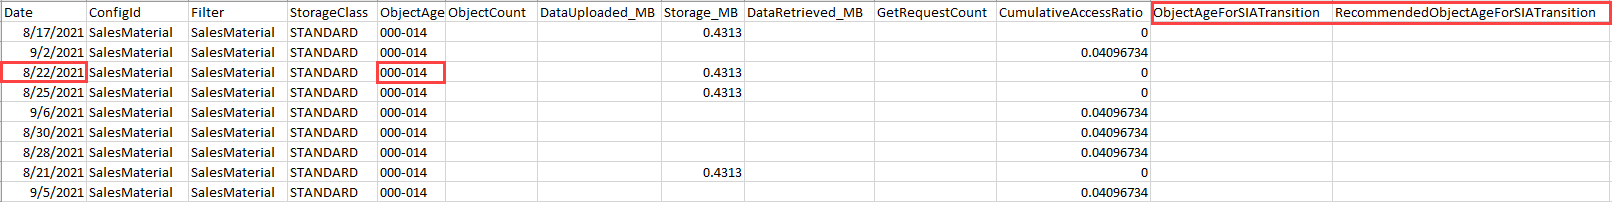 
        Screen shot of exported storage class analysis data sorted by date within object age group.
      